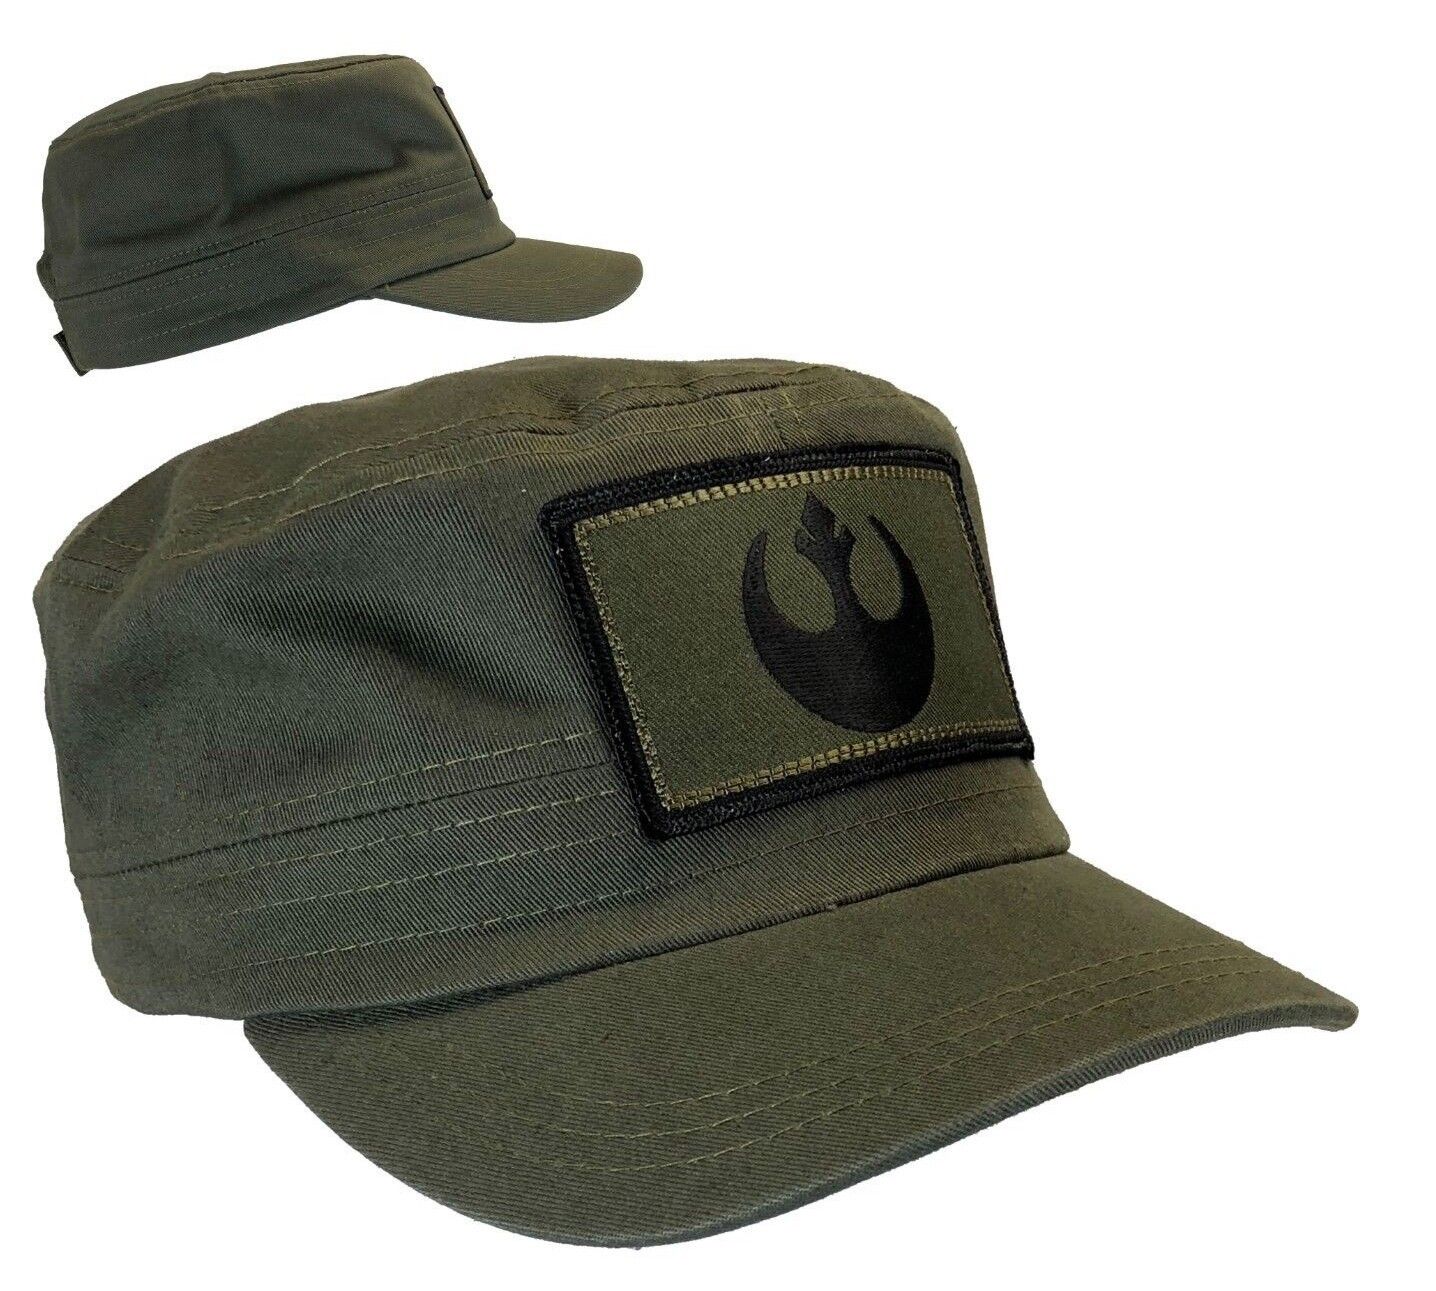 Star Wars Rebel Hat 100% Cotton DOUBLE LAYERED OD Fatigue Castro Style Cap